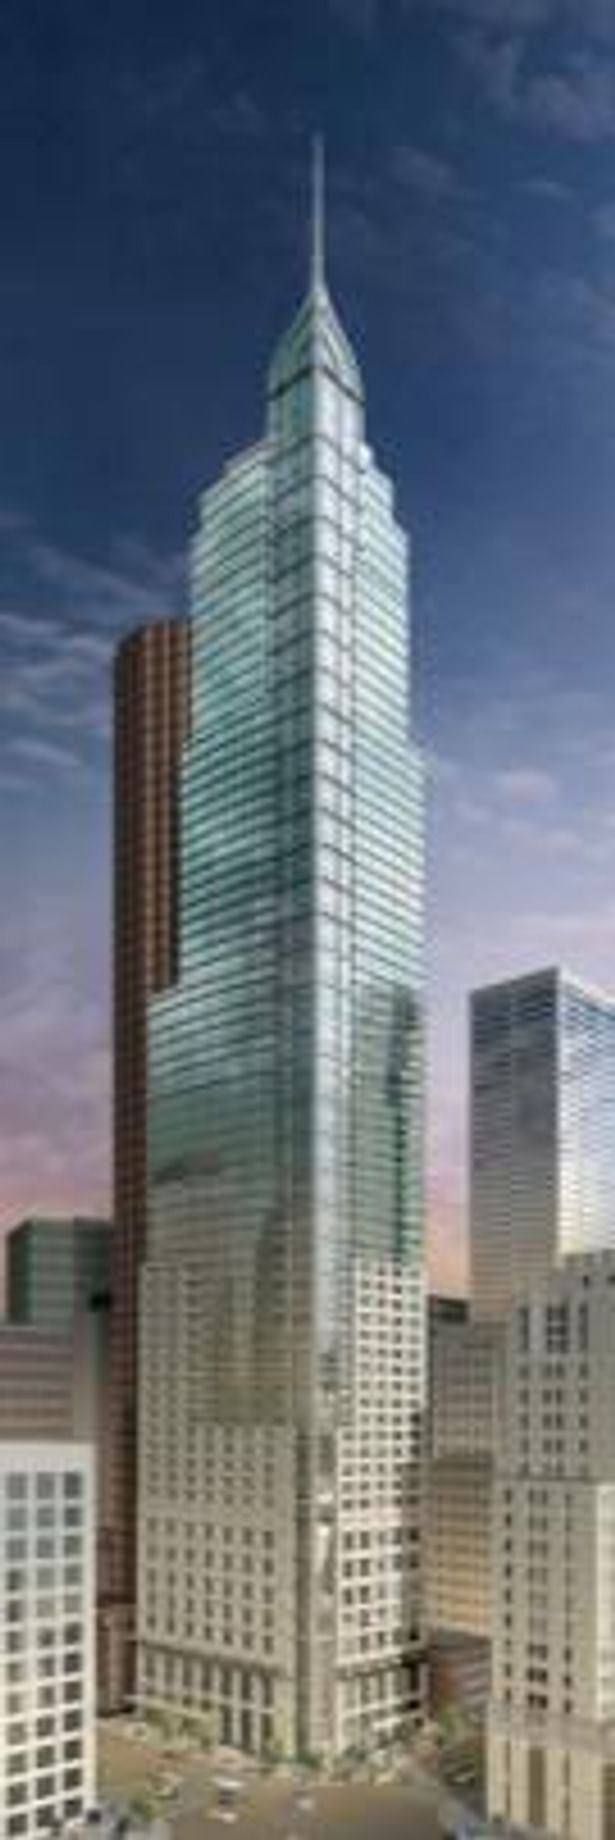 Trump Tower (TFD & Consulting)